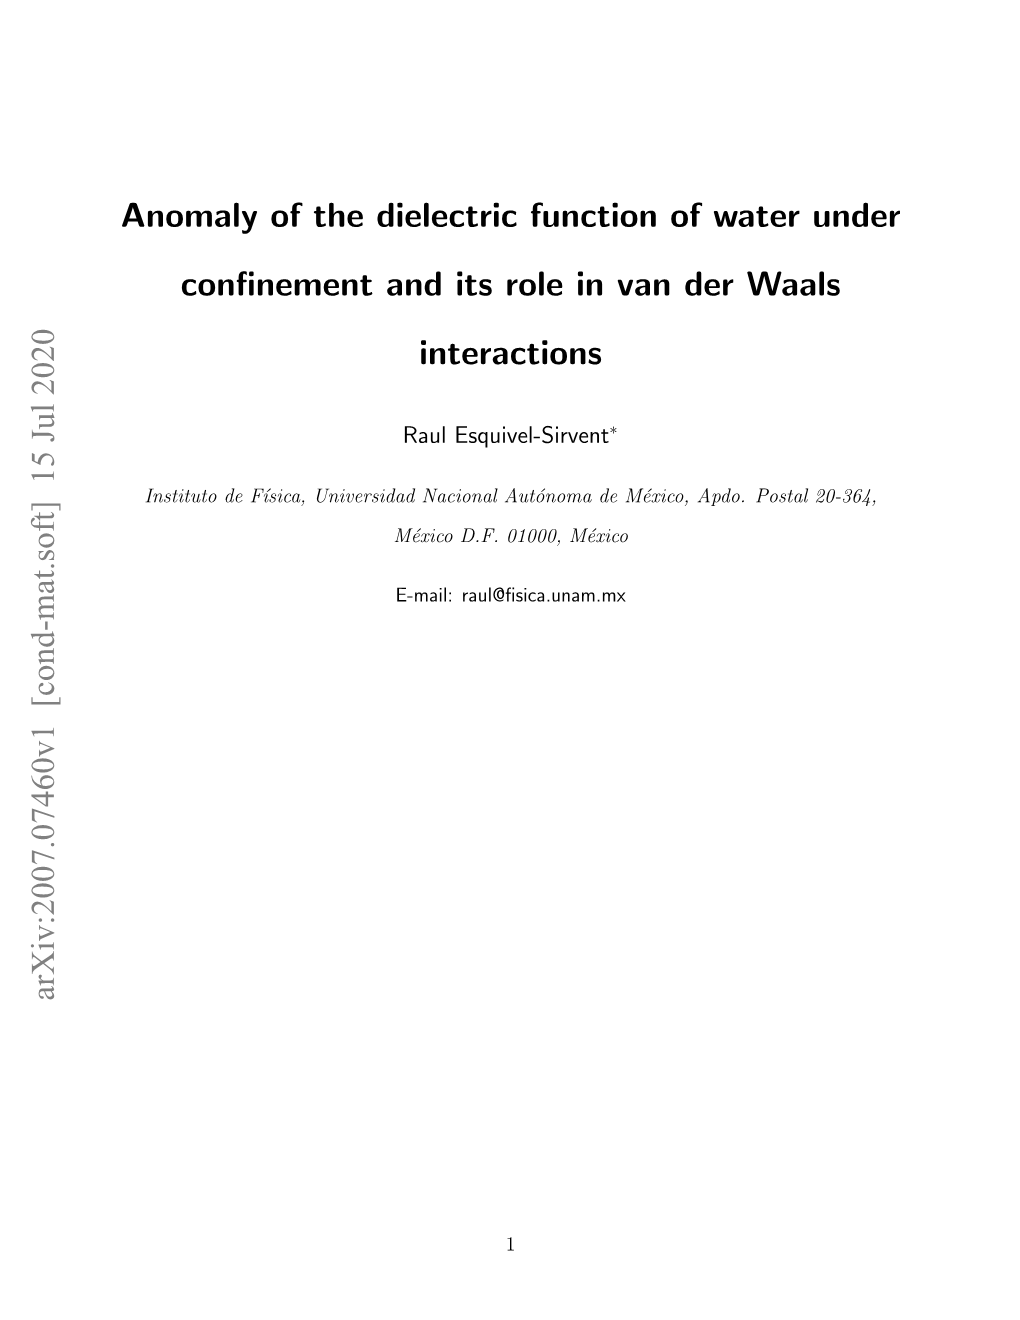 Anomaly of the Dielectric Function of Water Under Confinement and Its